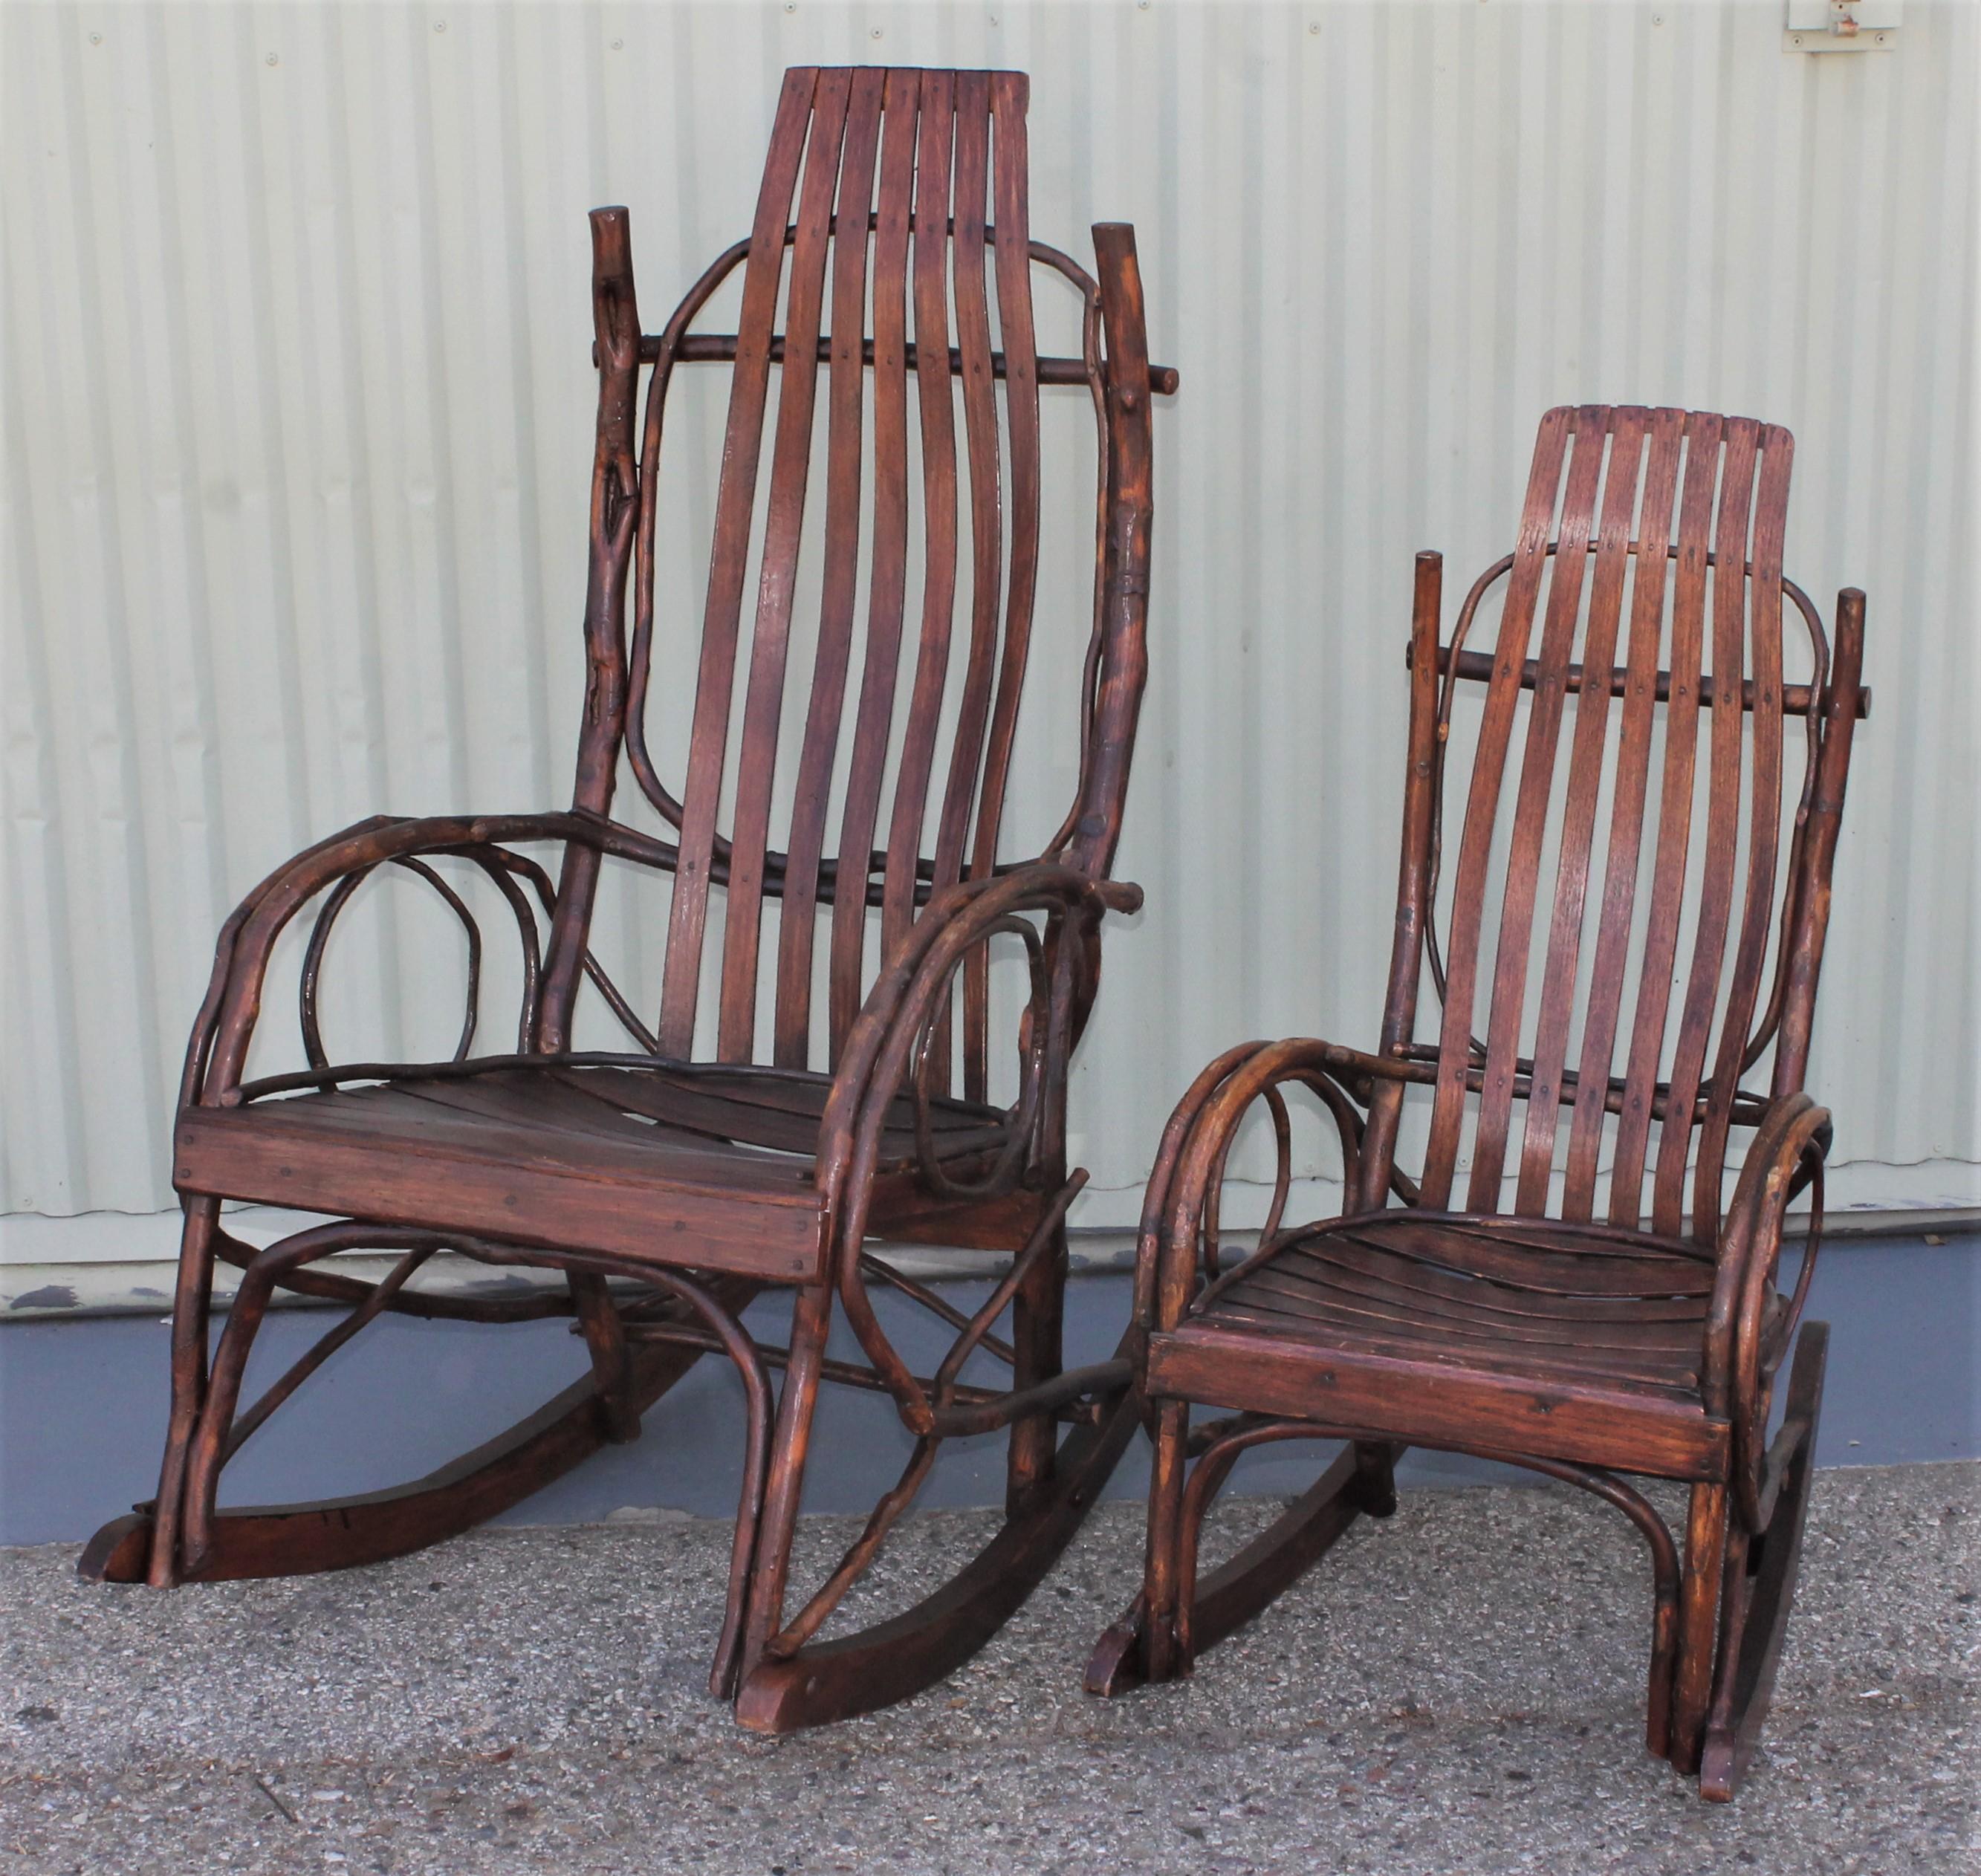 These bent wood rocking chairs are in fantastic condition. Both are in working condition and have a nice worn patina. They were found in Pennsylvania in Lancaster County.

Child's rocker measures 
26 inches deep x 17 inches wide x 32 inches high